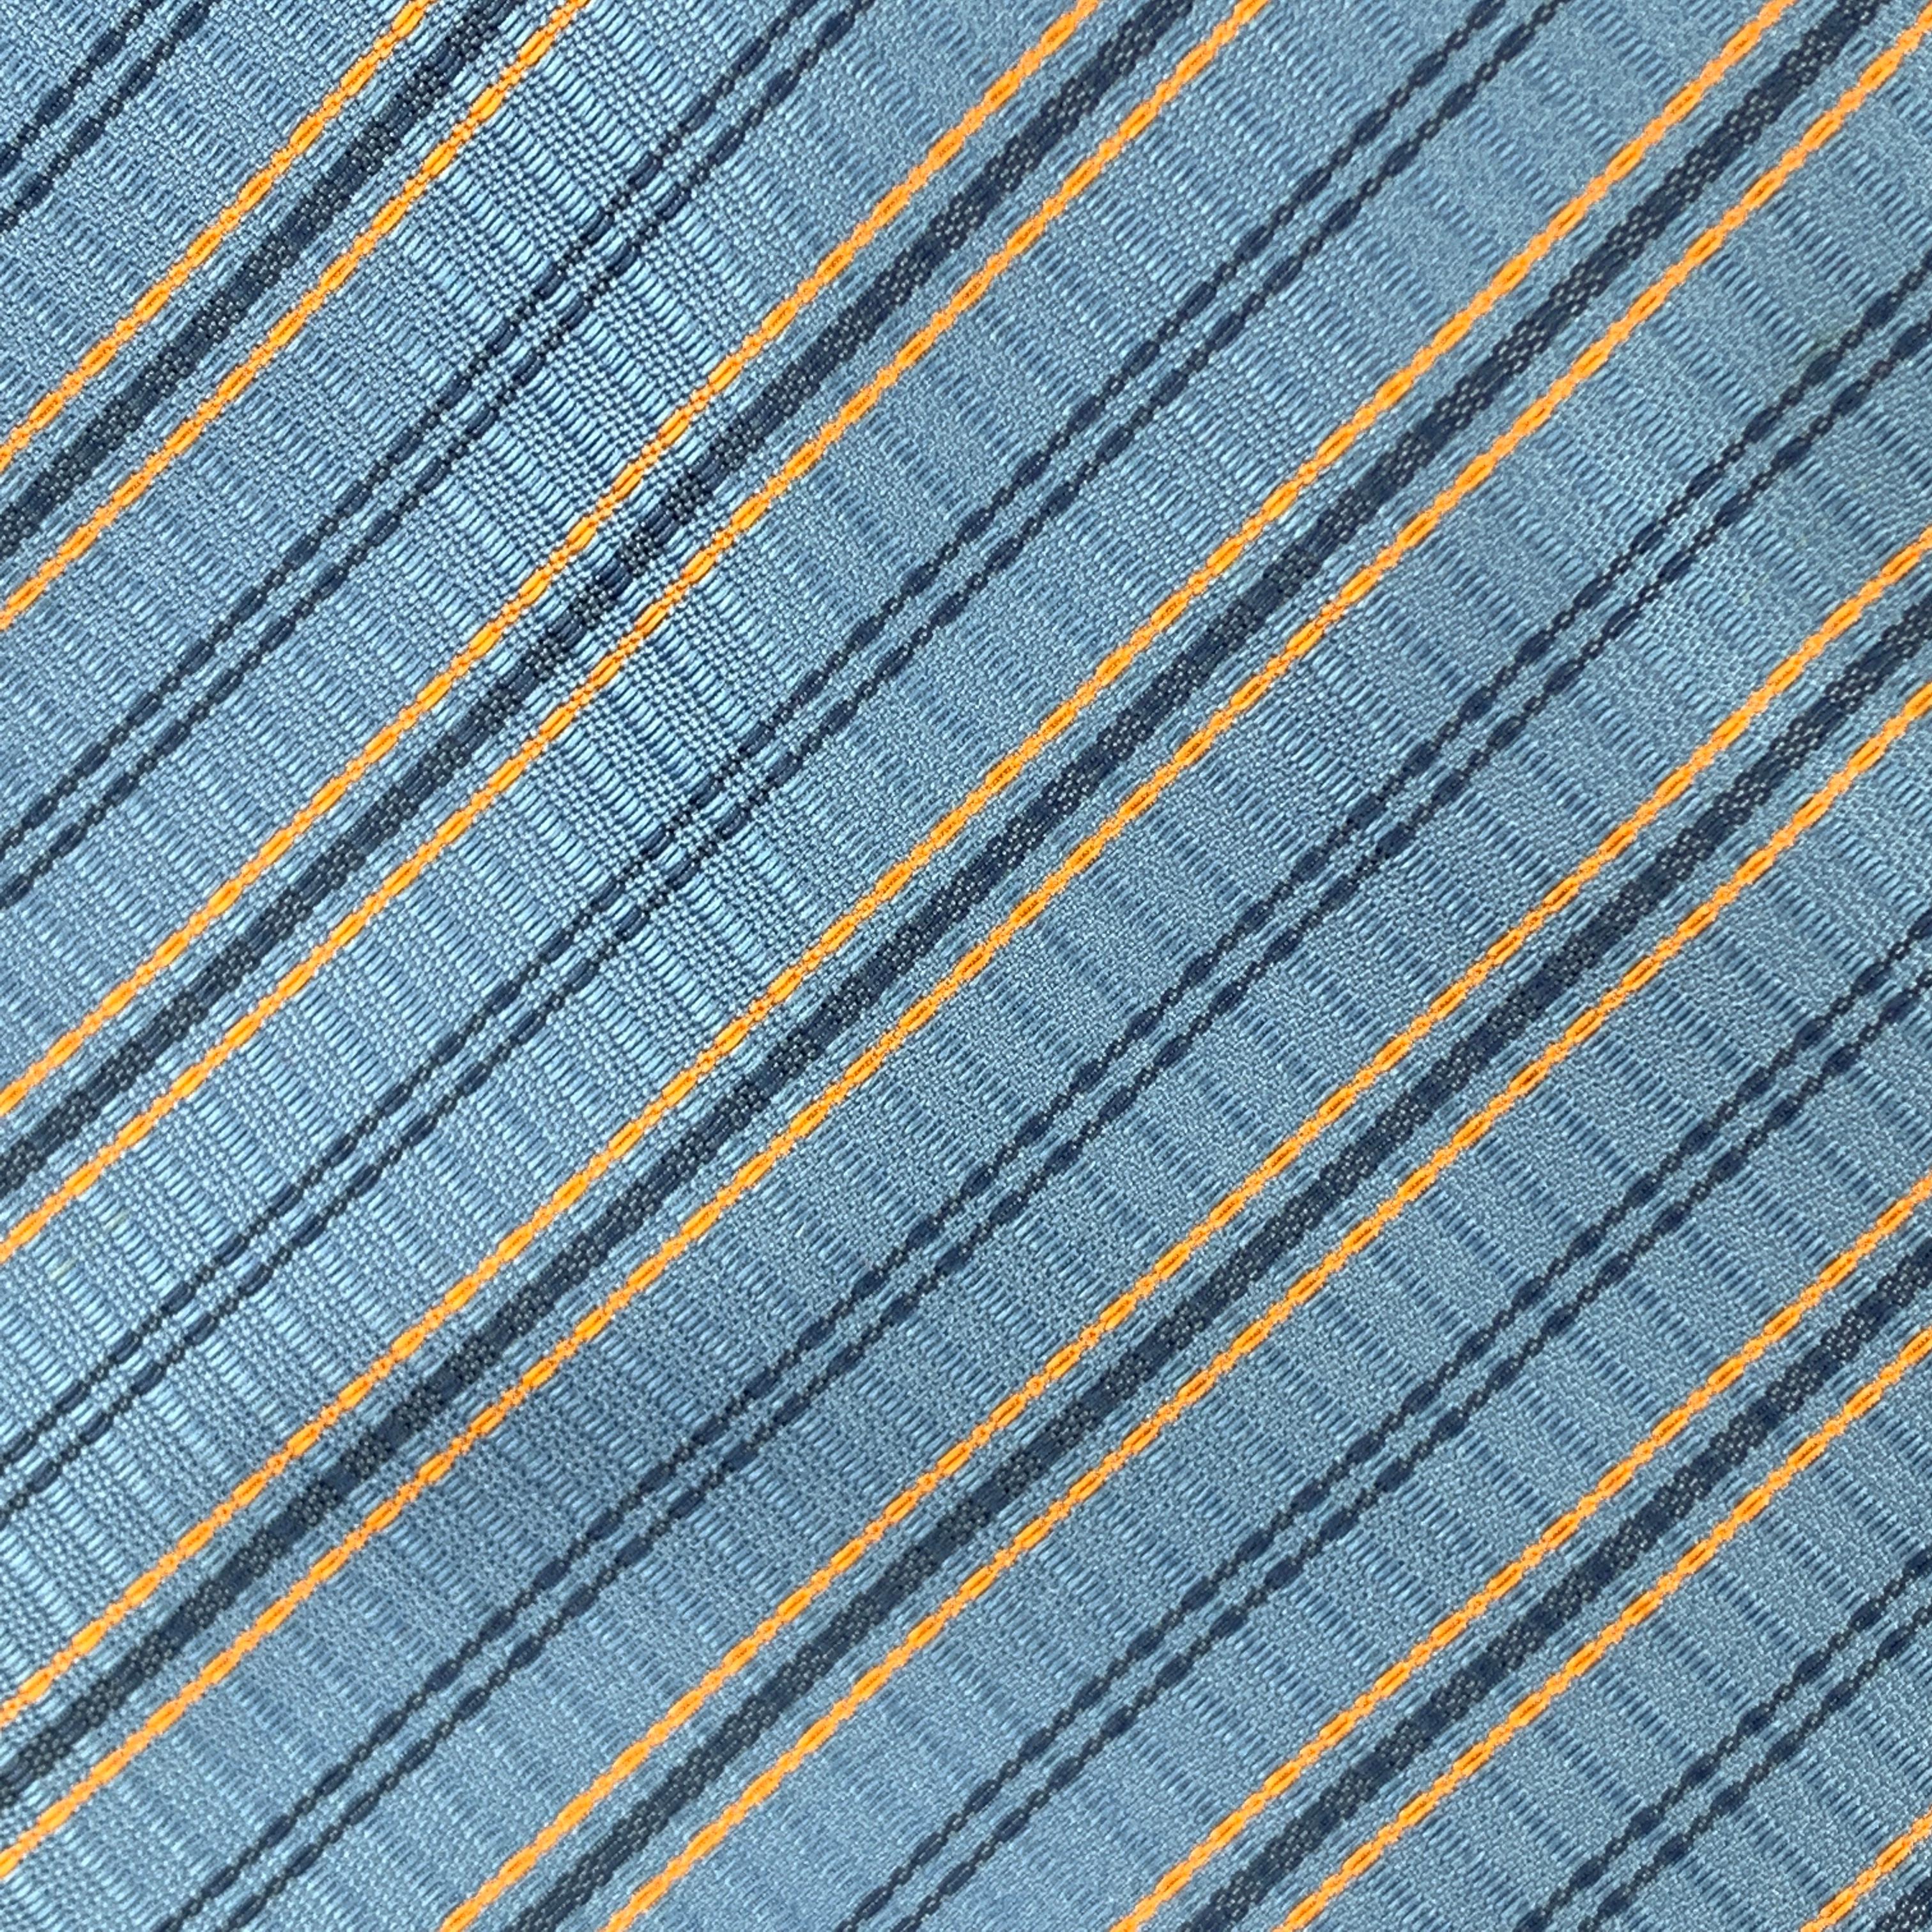 HERMES necktie comes in light blue silk twill with all over Orange stripe plaid print. Made in France.

Excellent Pre-Owned Condition.

Width: 3.75 in. 